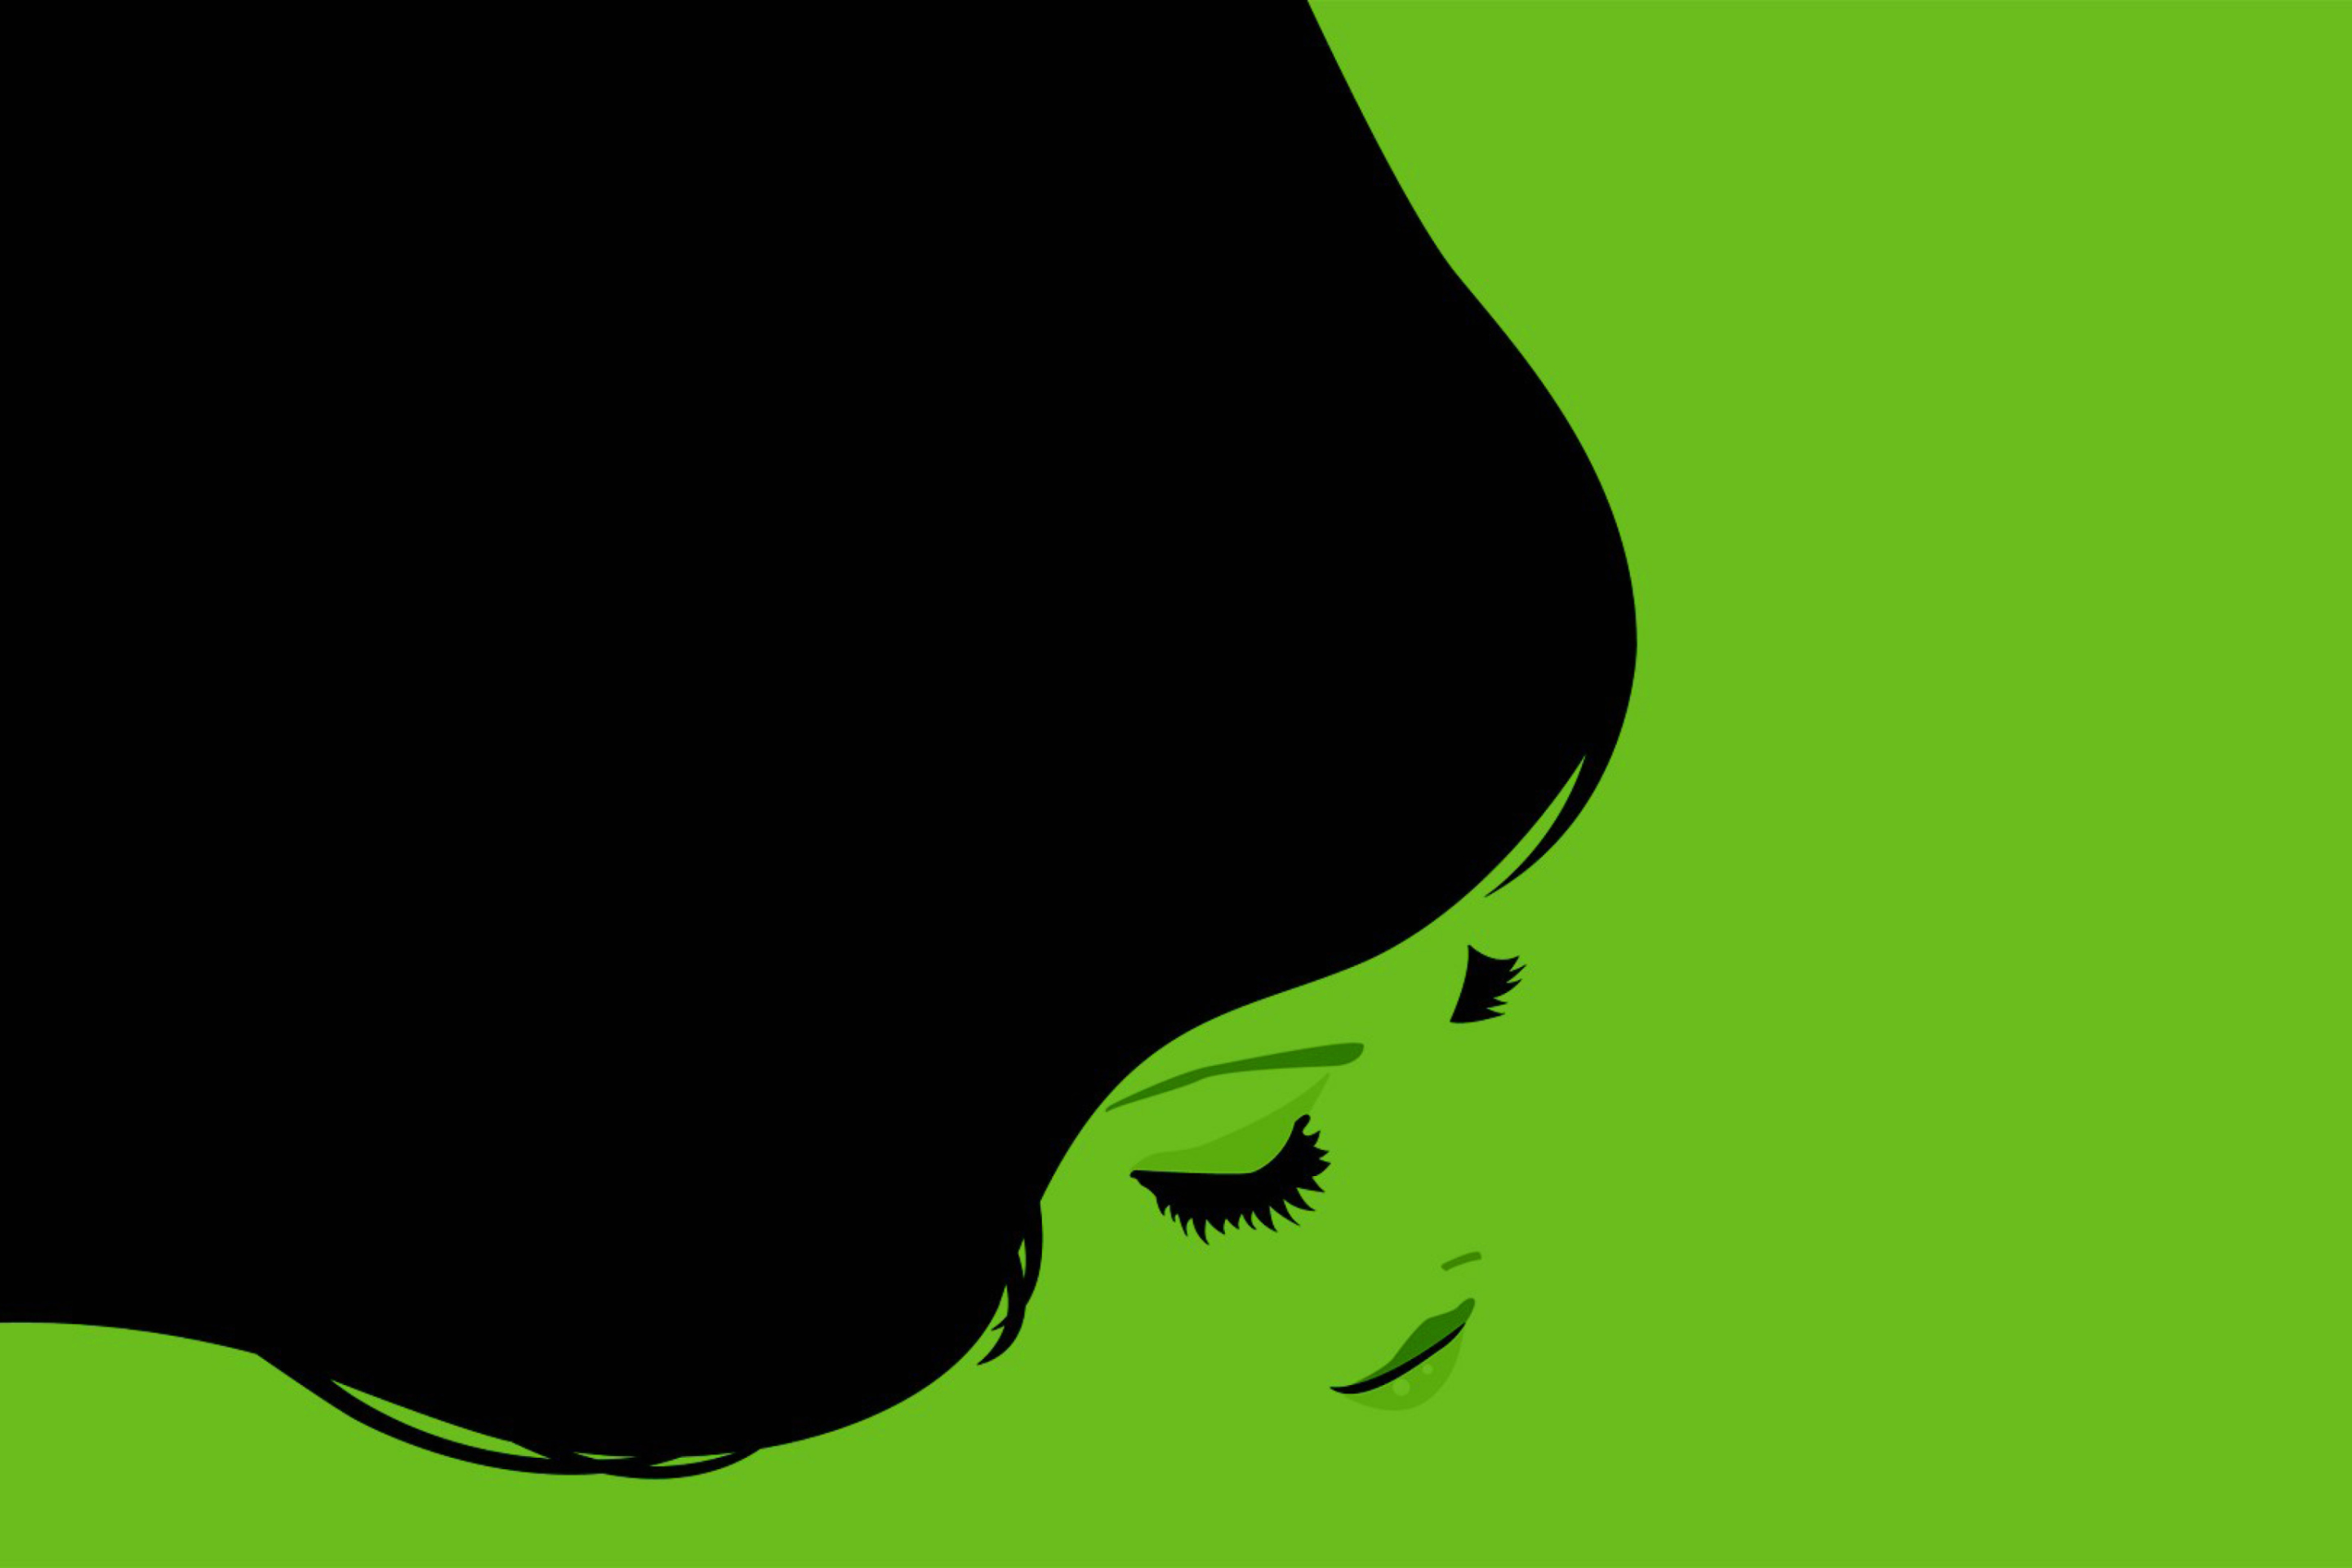 Girl's Face On Green Background wallpaper 2880x1920